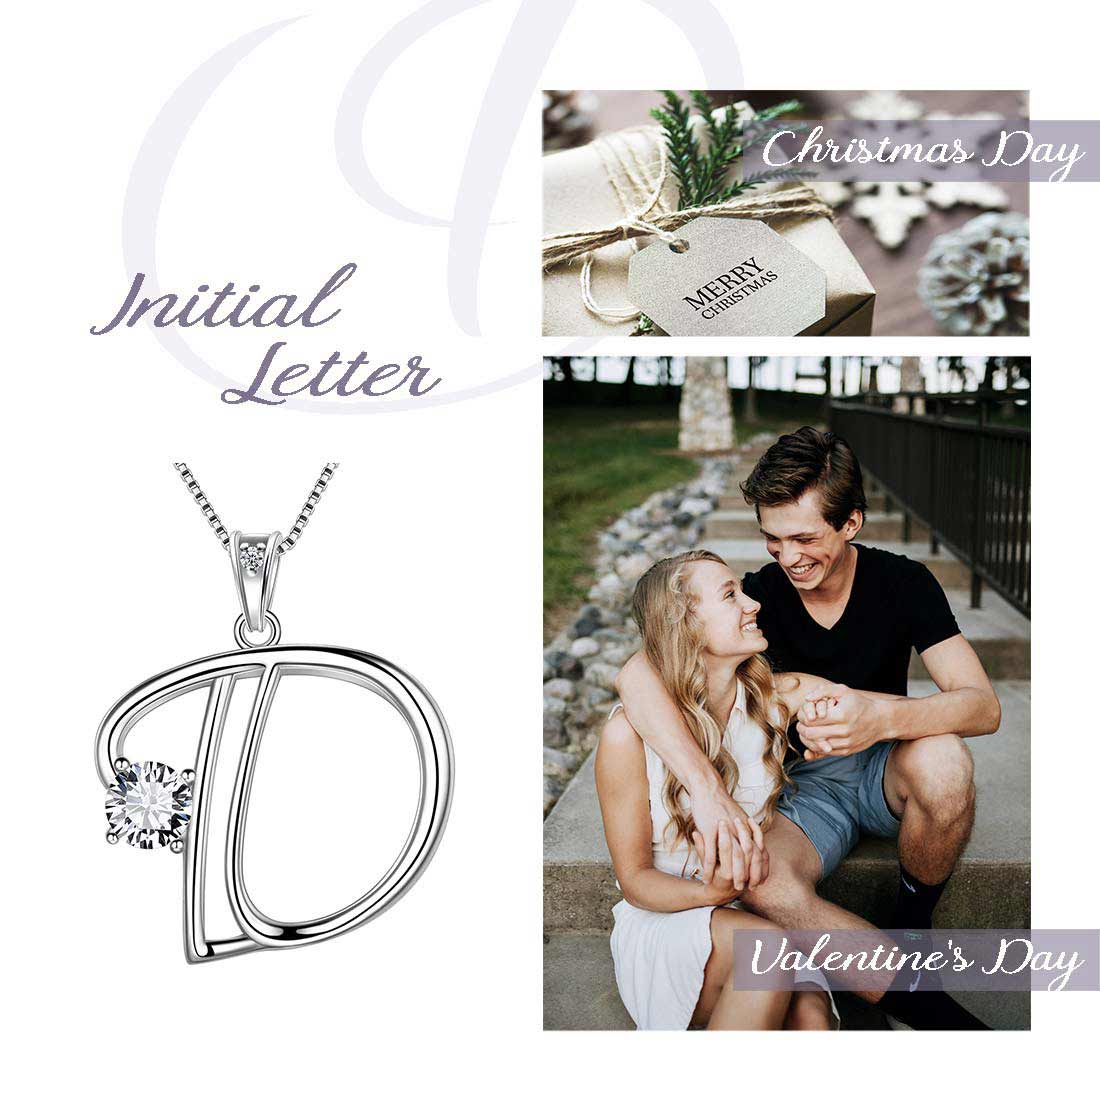 Women Letter D Initial Necklaces Sterling Silver - Necklaces - Aurora Tears Jewelry